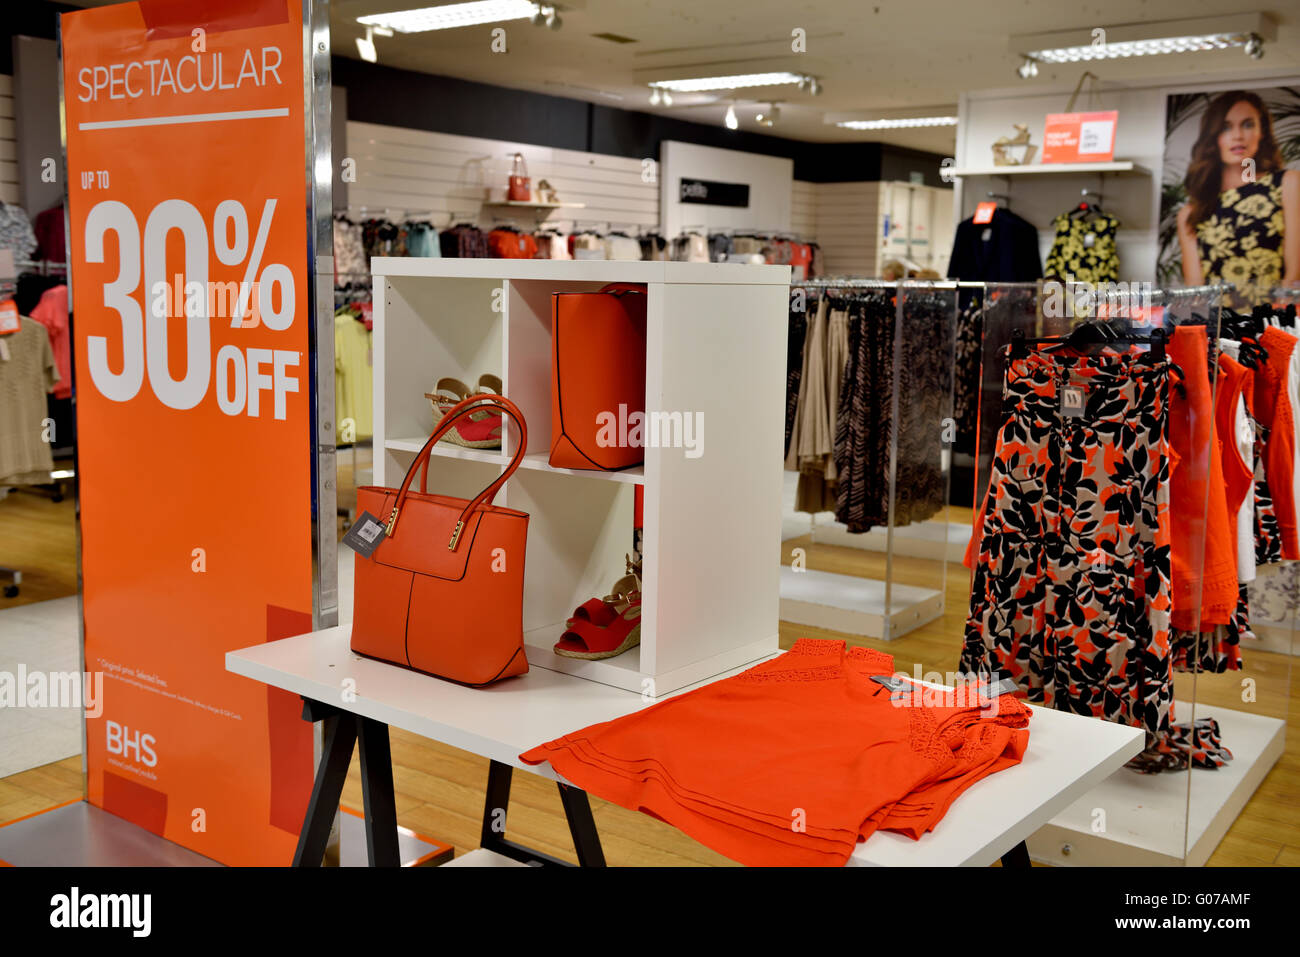 British Home Stores, BHS, Bristol Broadmead, UK, 30 April, 2016. With financial difficulties leading to collapse and administration the national chain of stores has sale on throughout stores. Womens cloathing and accessories with 30 percent off in the sale. “Credit: CHARLES STIRLING/Alamy Live News” Stock Photo